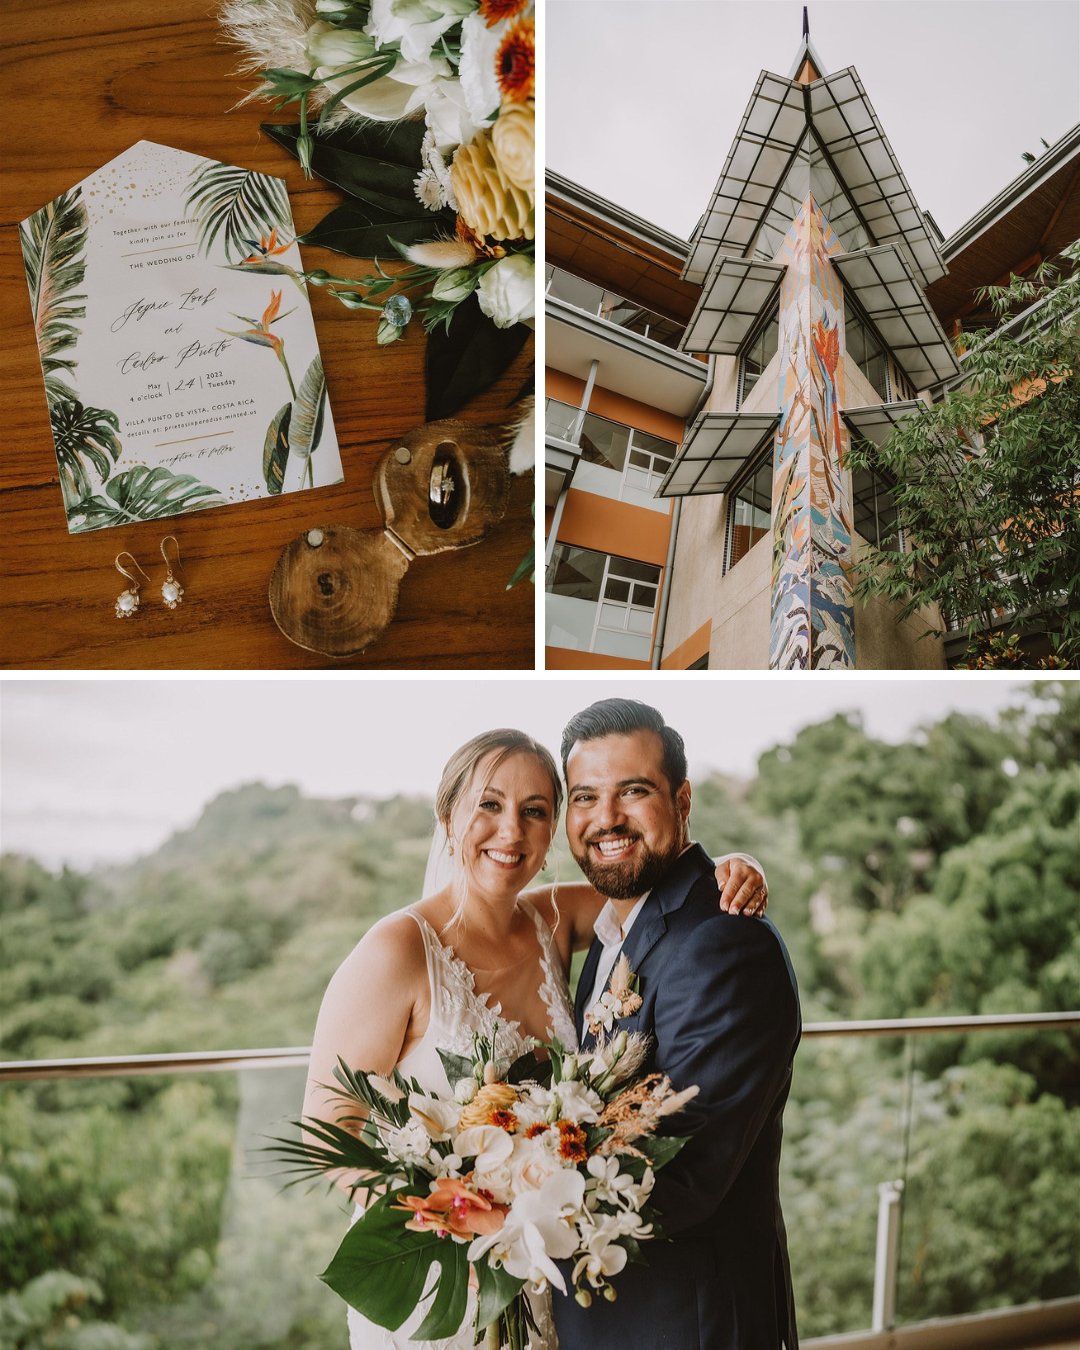 tropical wedding invitations, exterior of building, couple smile with rain forest backdrop